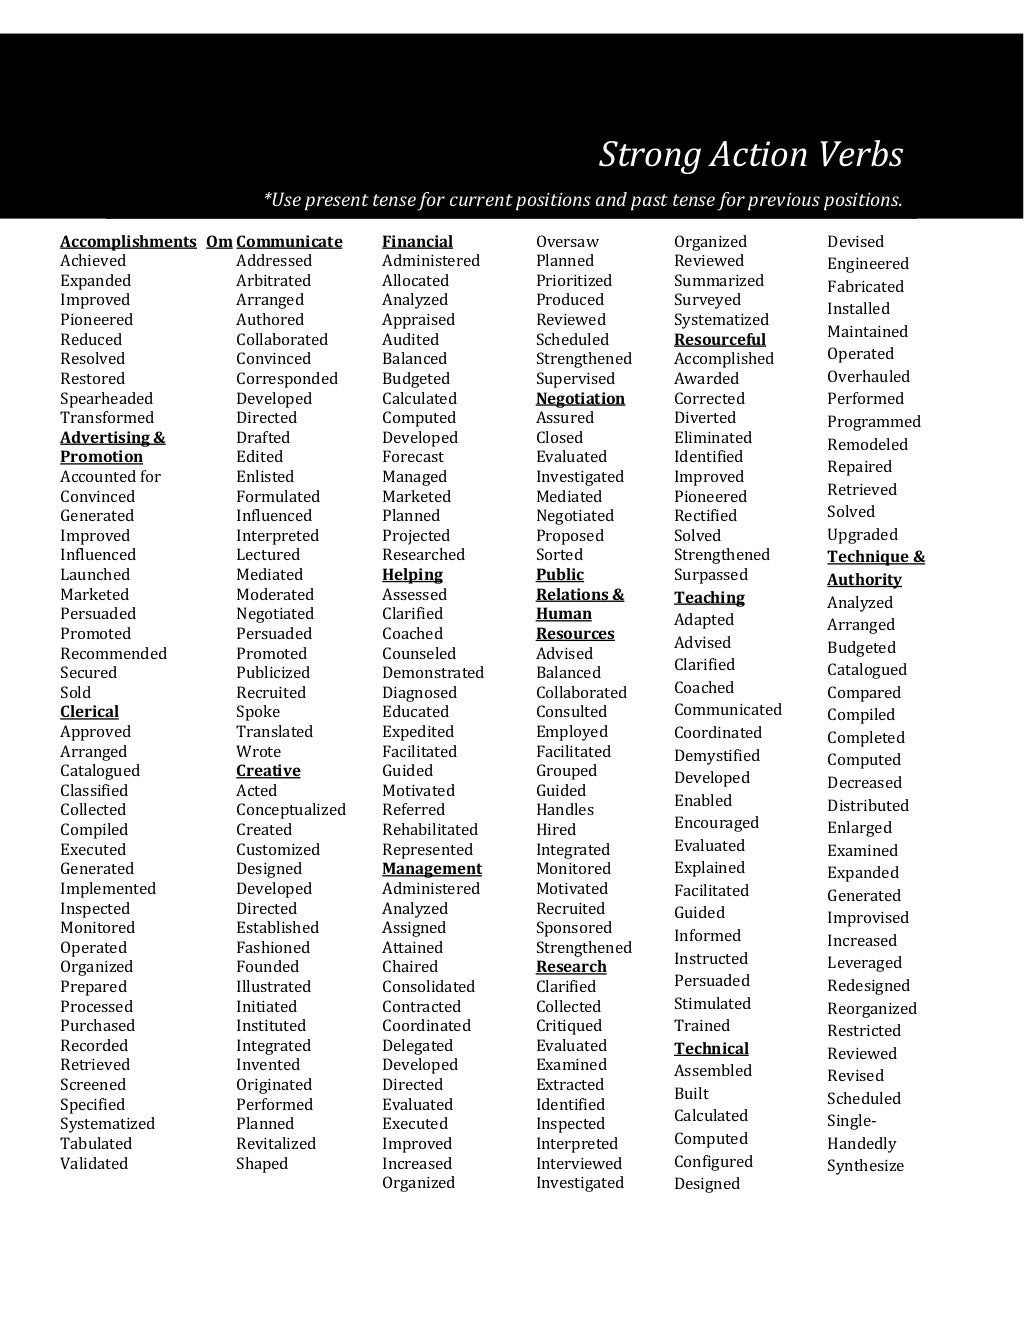 strong verbs for essay writing